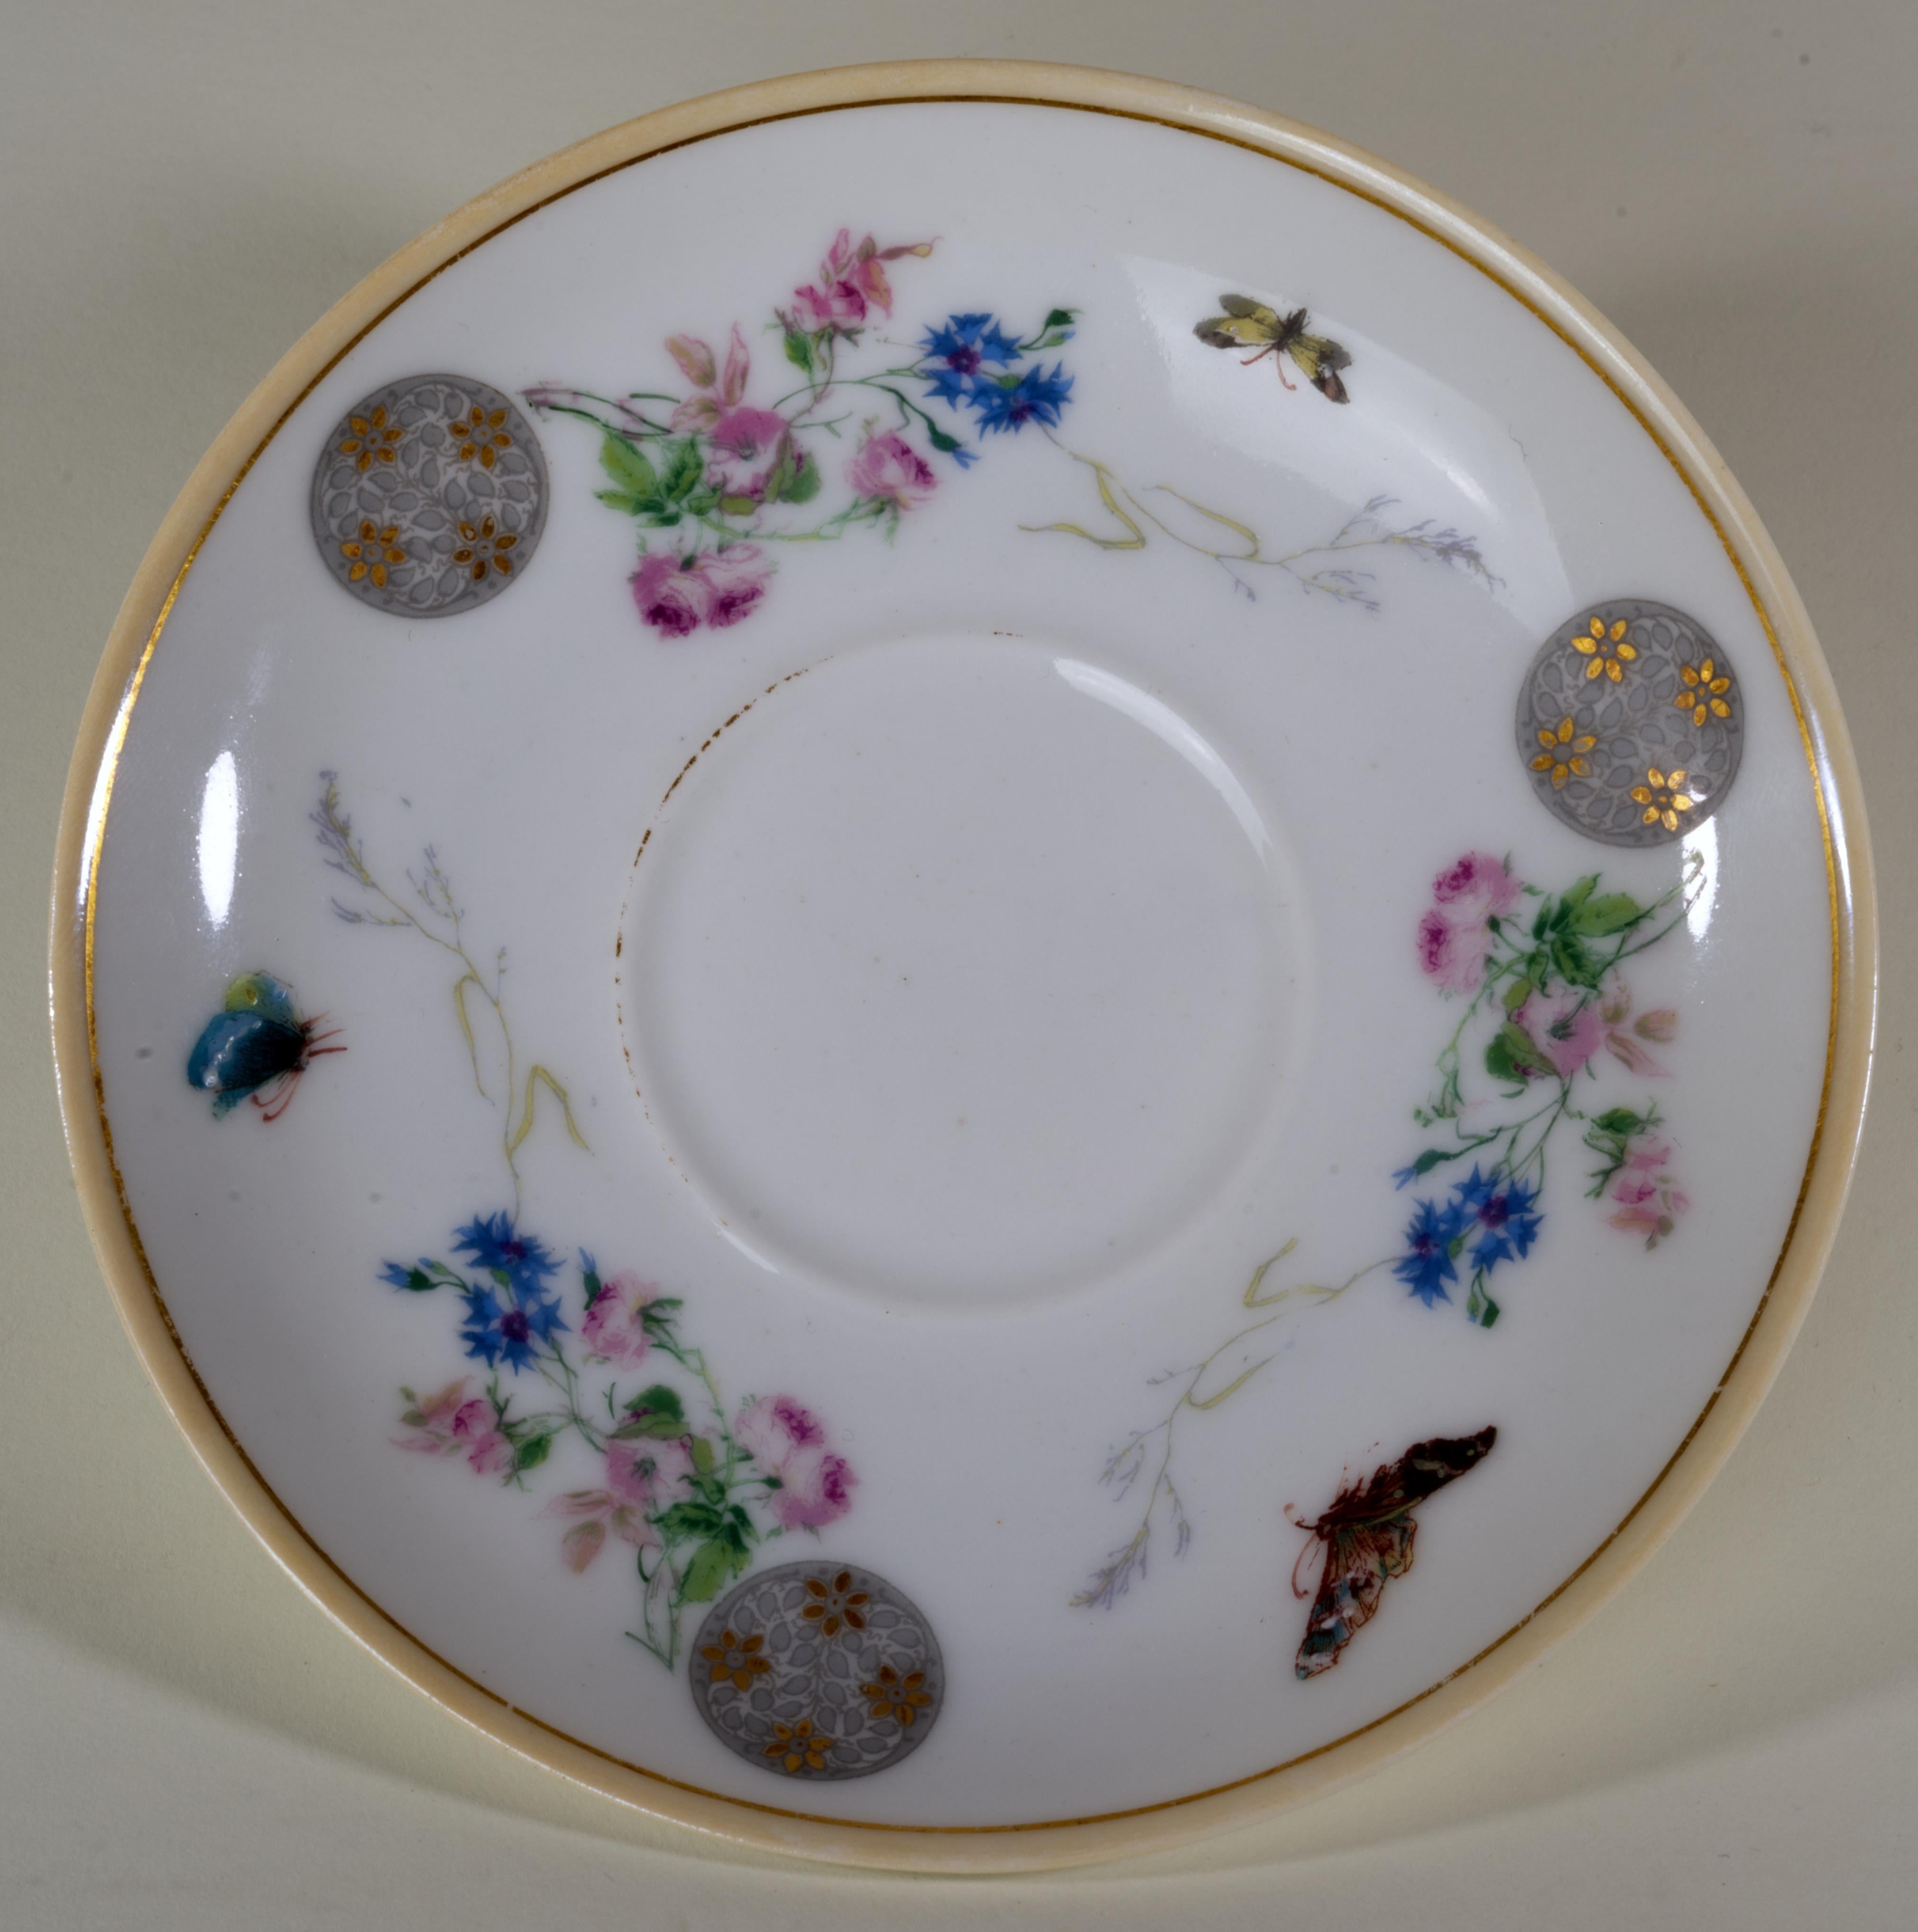 Haviland Limoges Butterfly Handled Cup and saucer set, 1879-1889, Aesthetic  For Sale 2